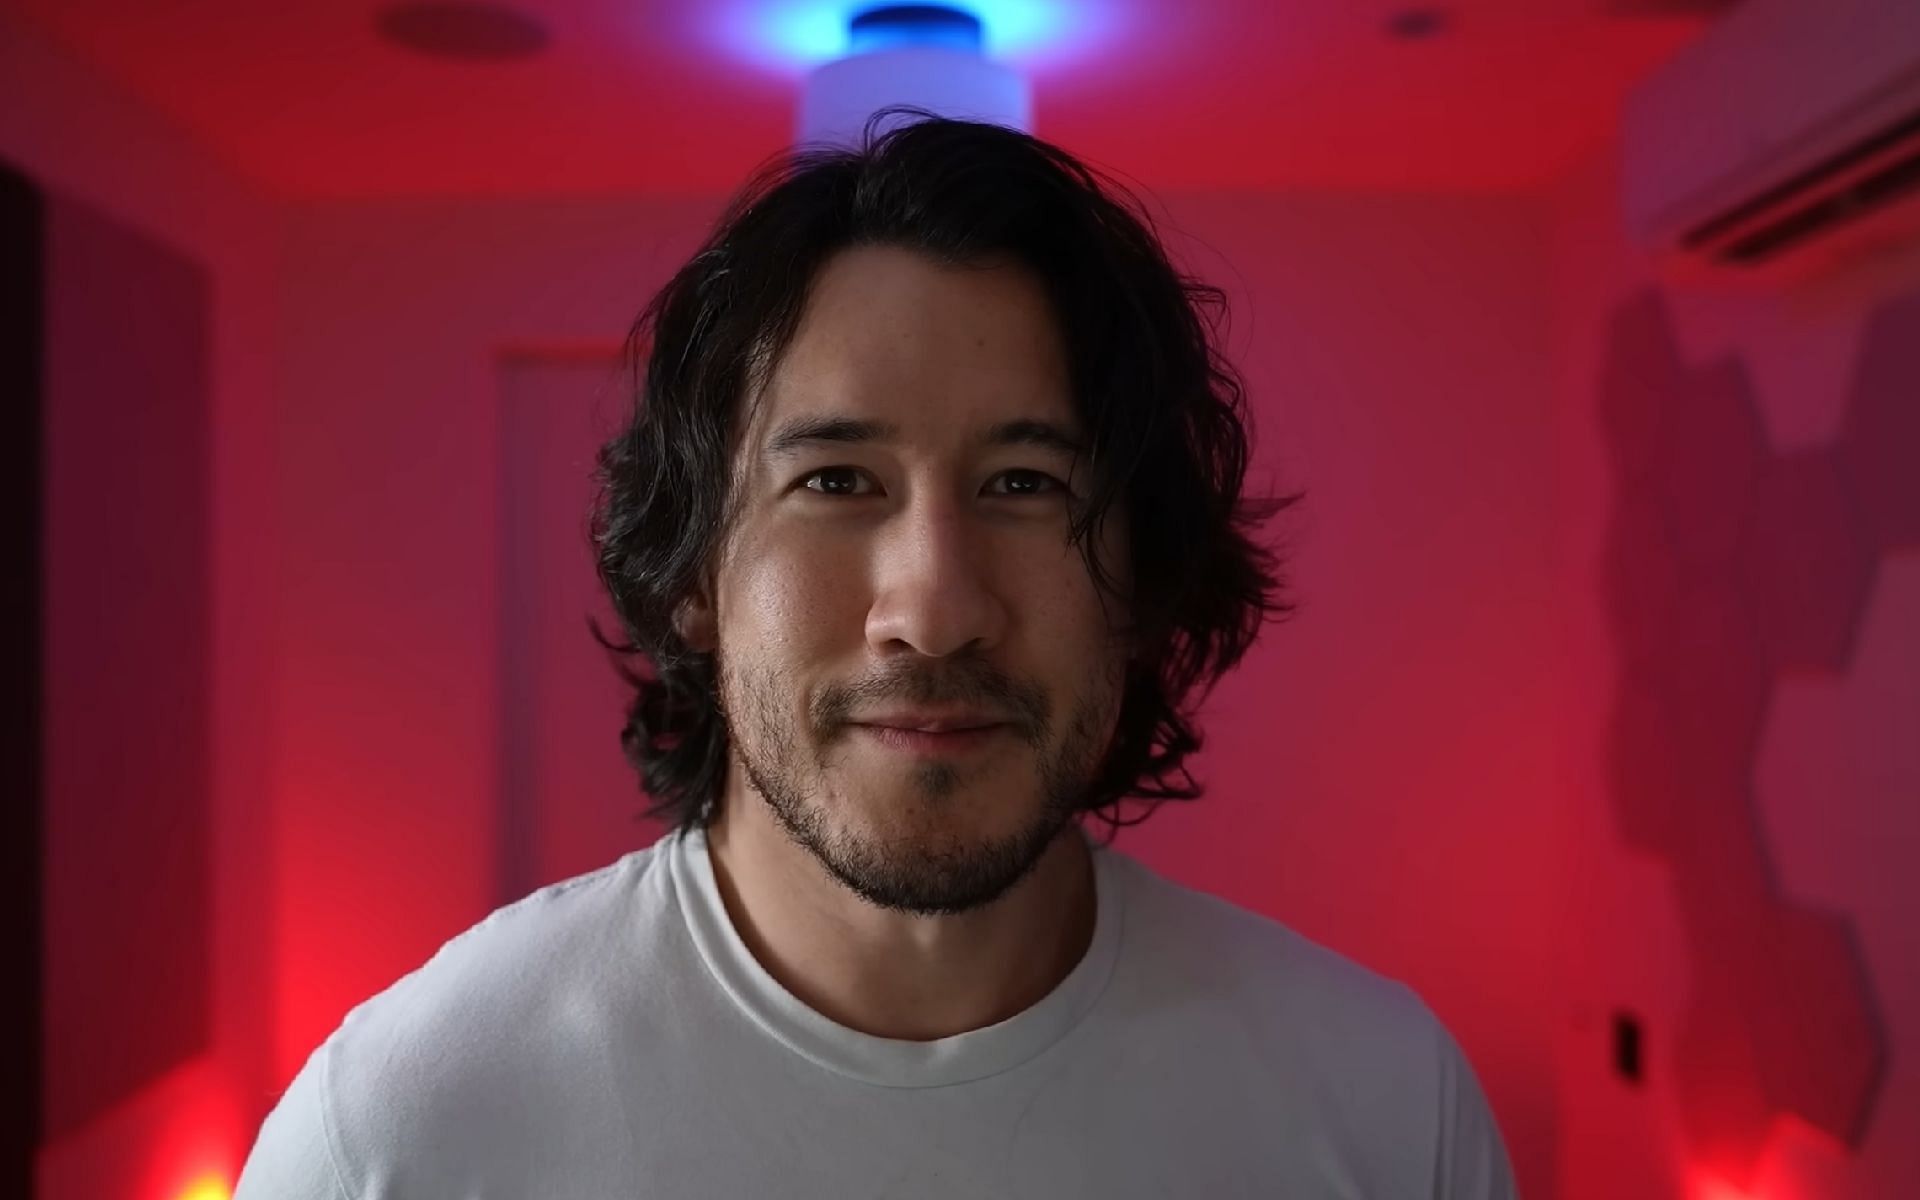 Twitter fans share numerous memes after Markiplier officially launches his OnlyFans account (Image via Markiplier/YouTube)